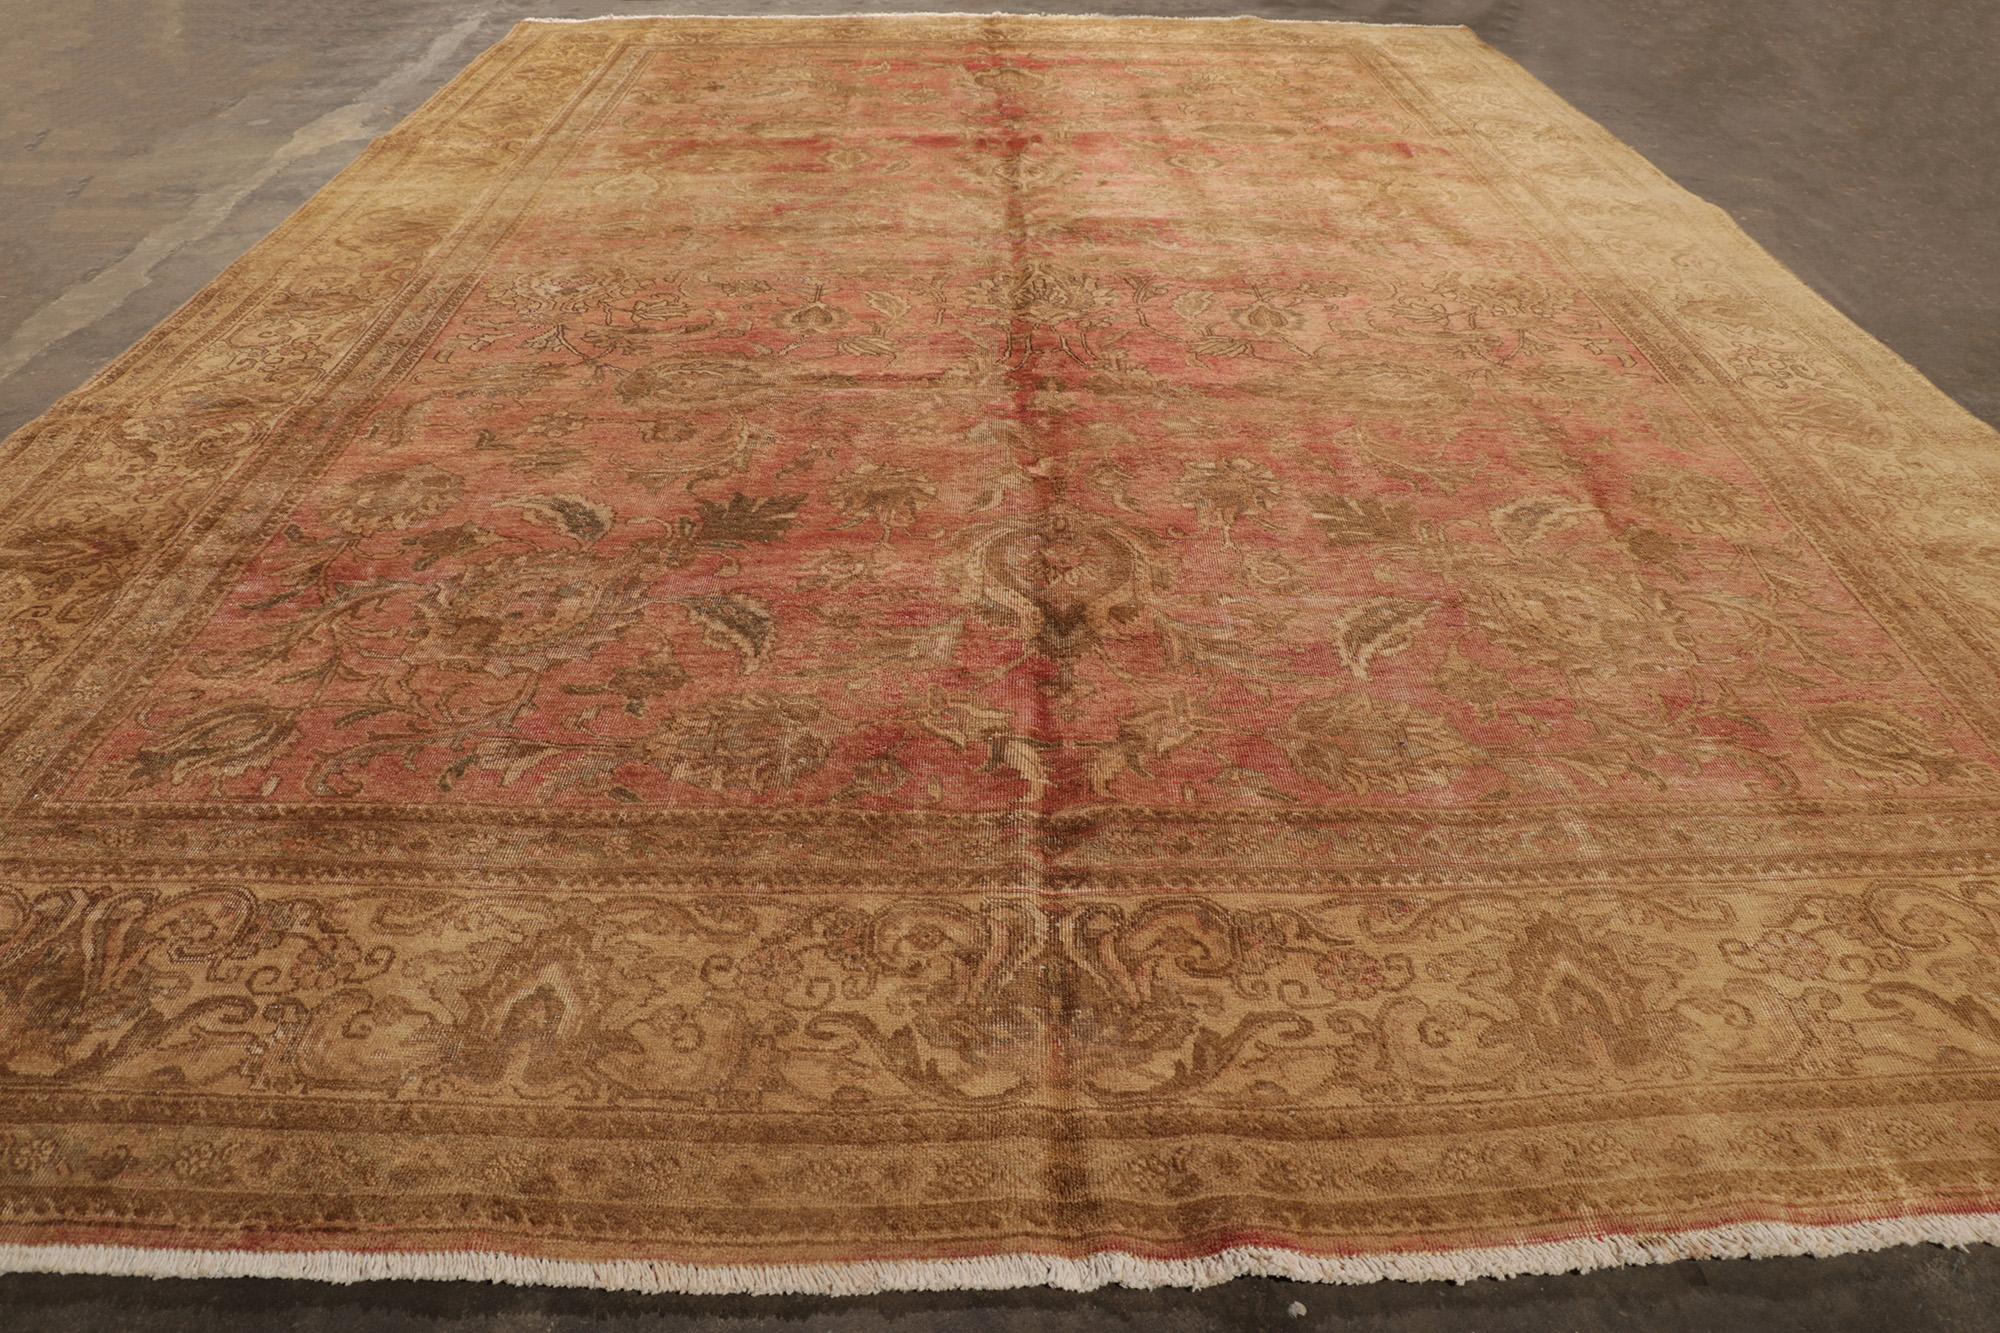 Distressed Antique Persian Tabriz Rug with Rustic English Cottage Style 1